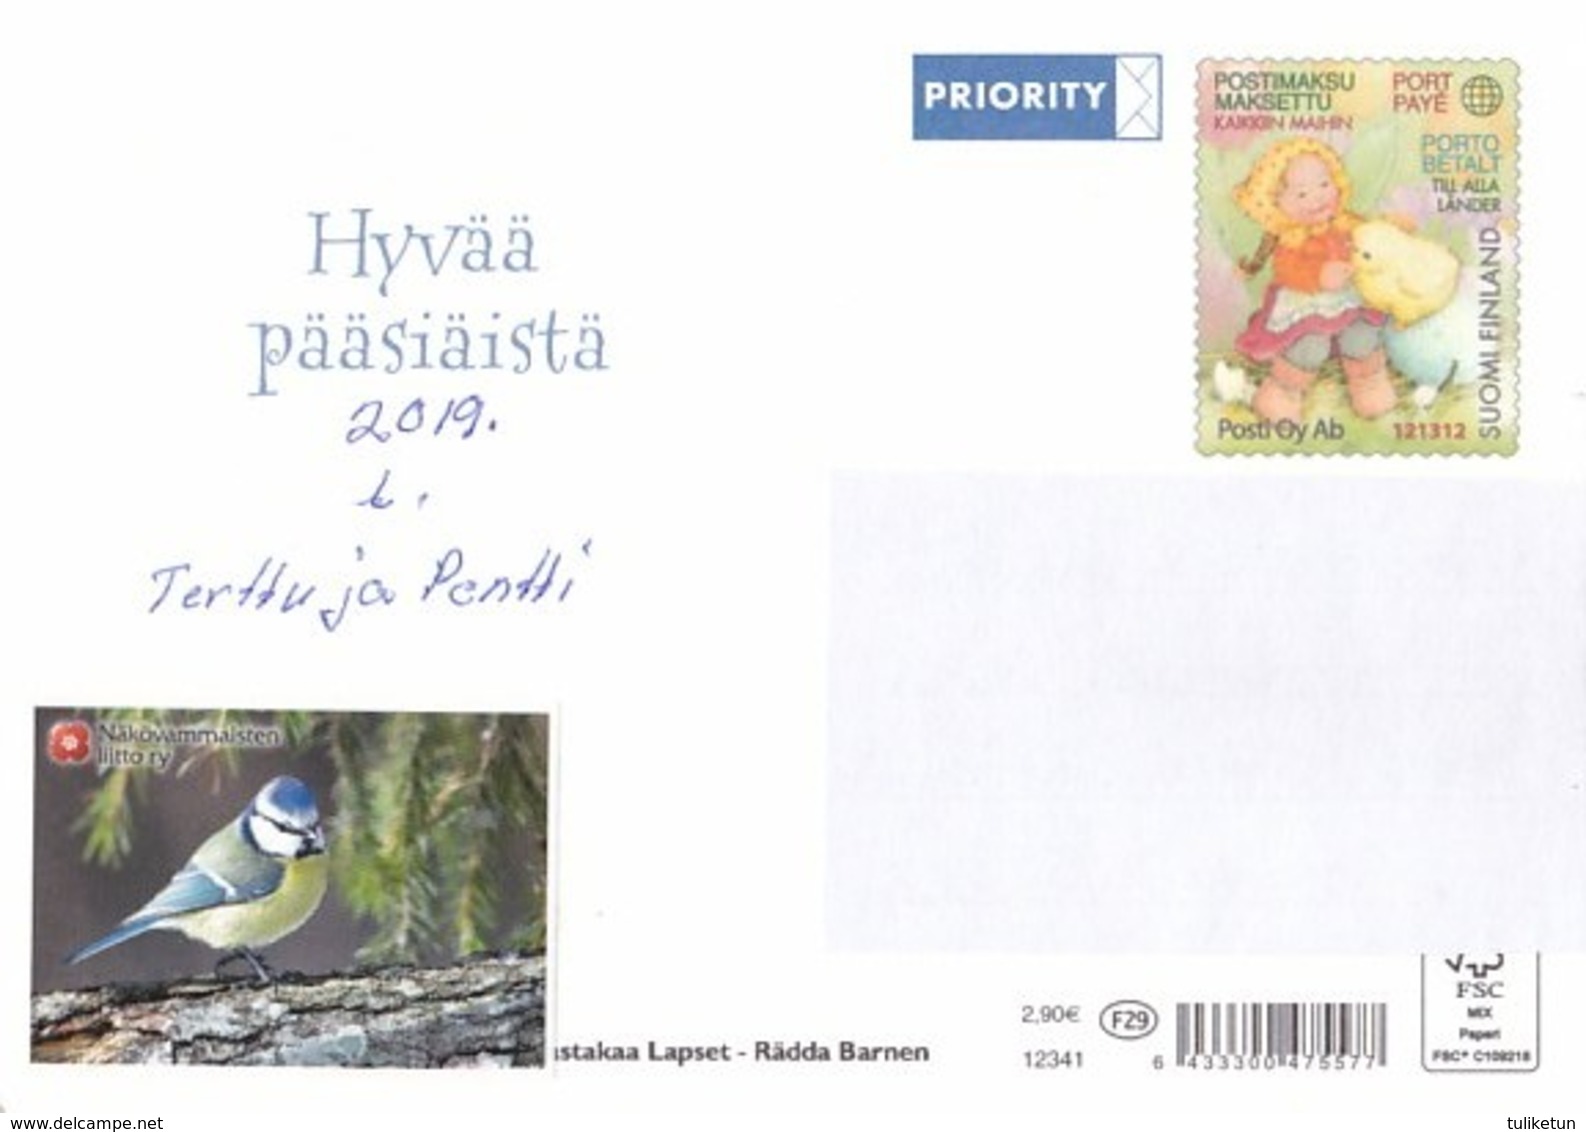 Postal Stationery - Bird - Chick - Hare - Easter Willows Flowers - Save The Kids 2019 - Suomi Finland - Postage Paid - Interi Postali